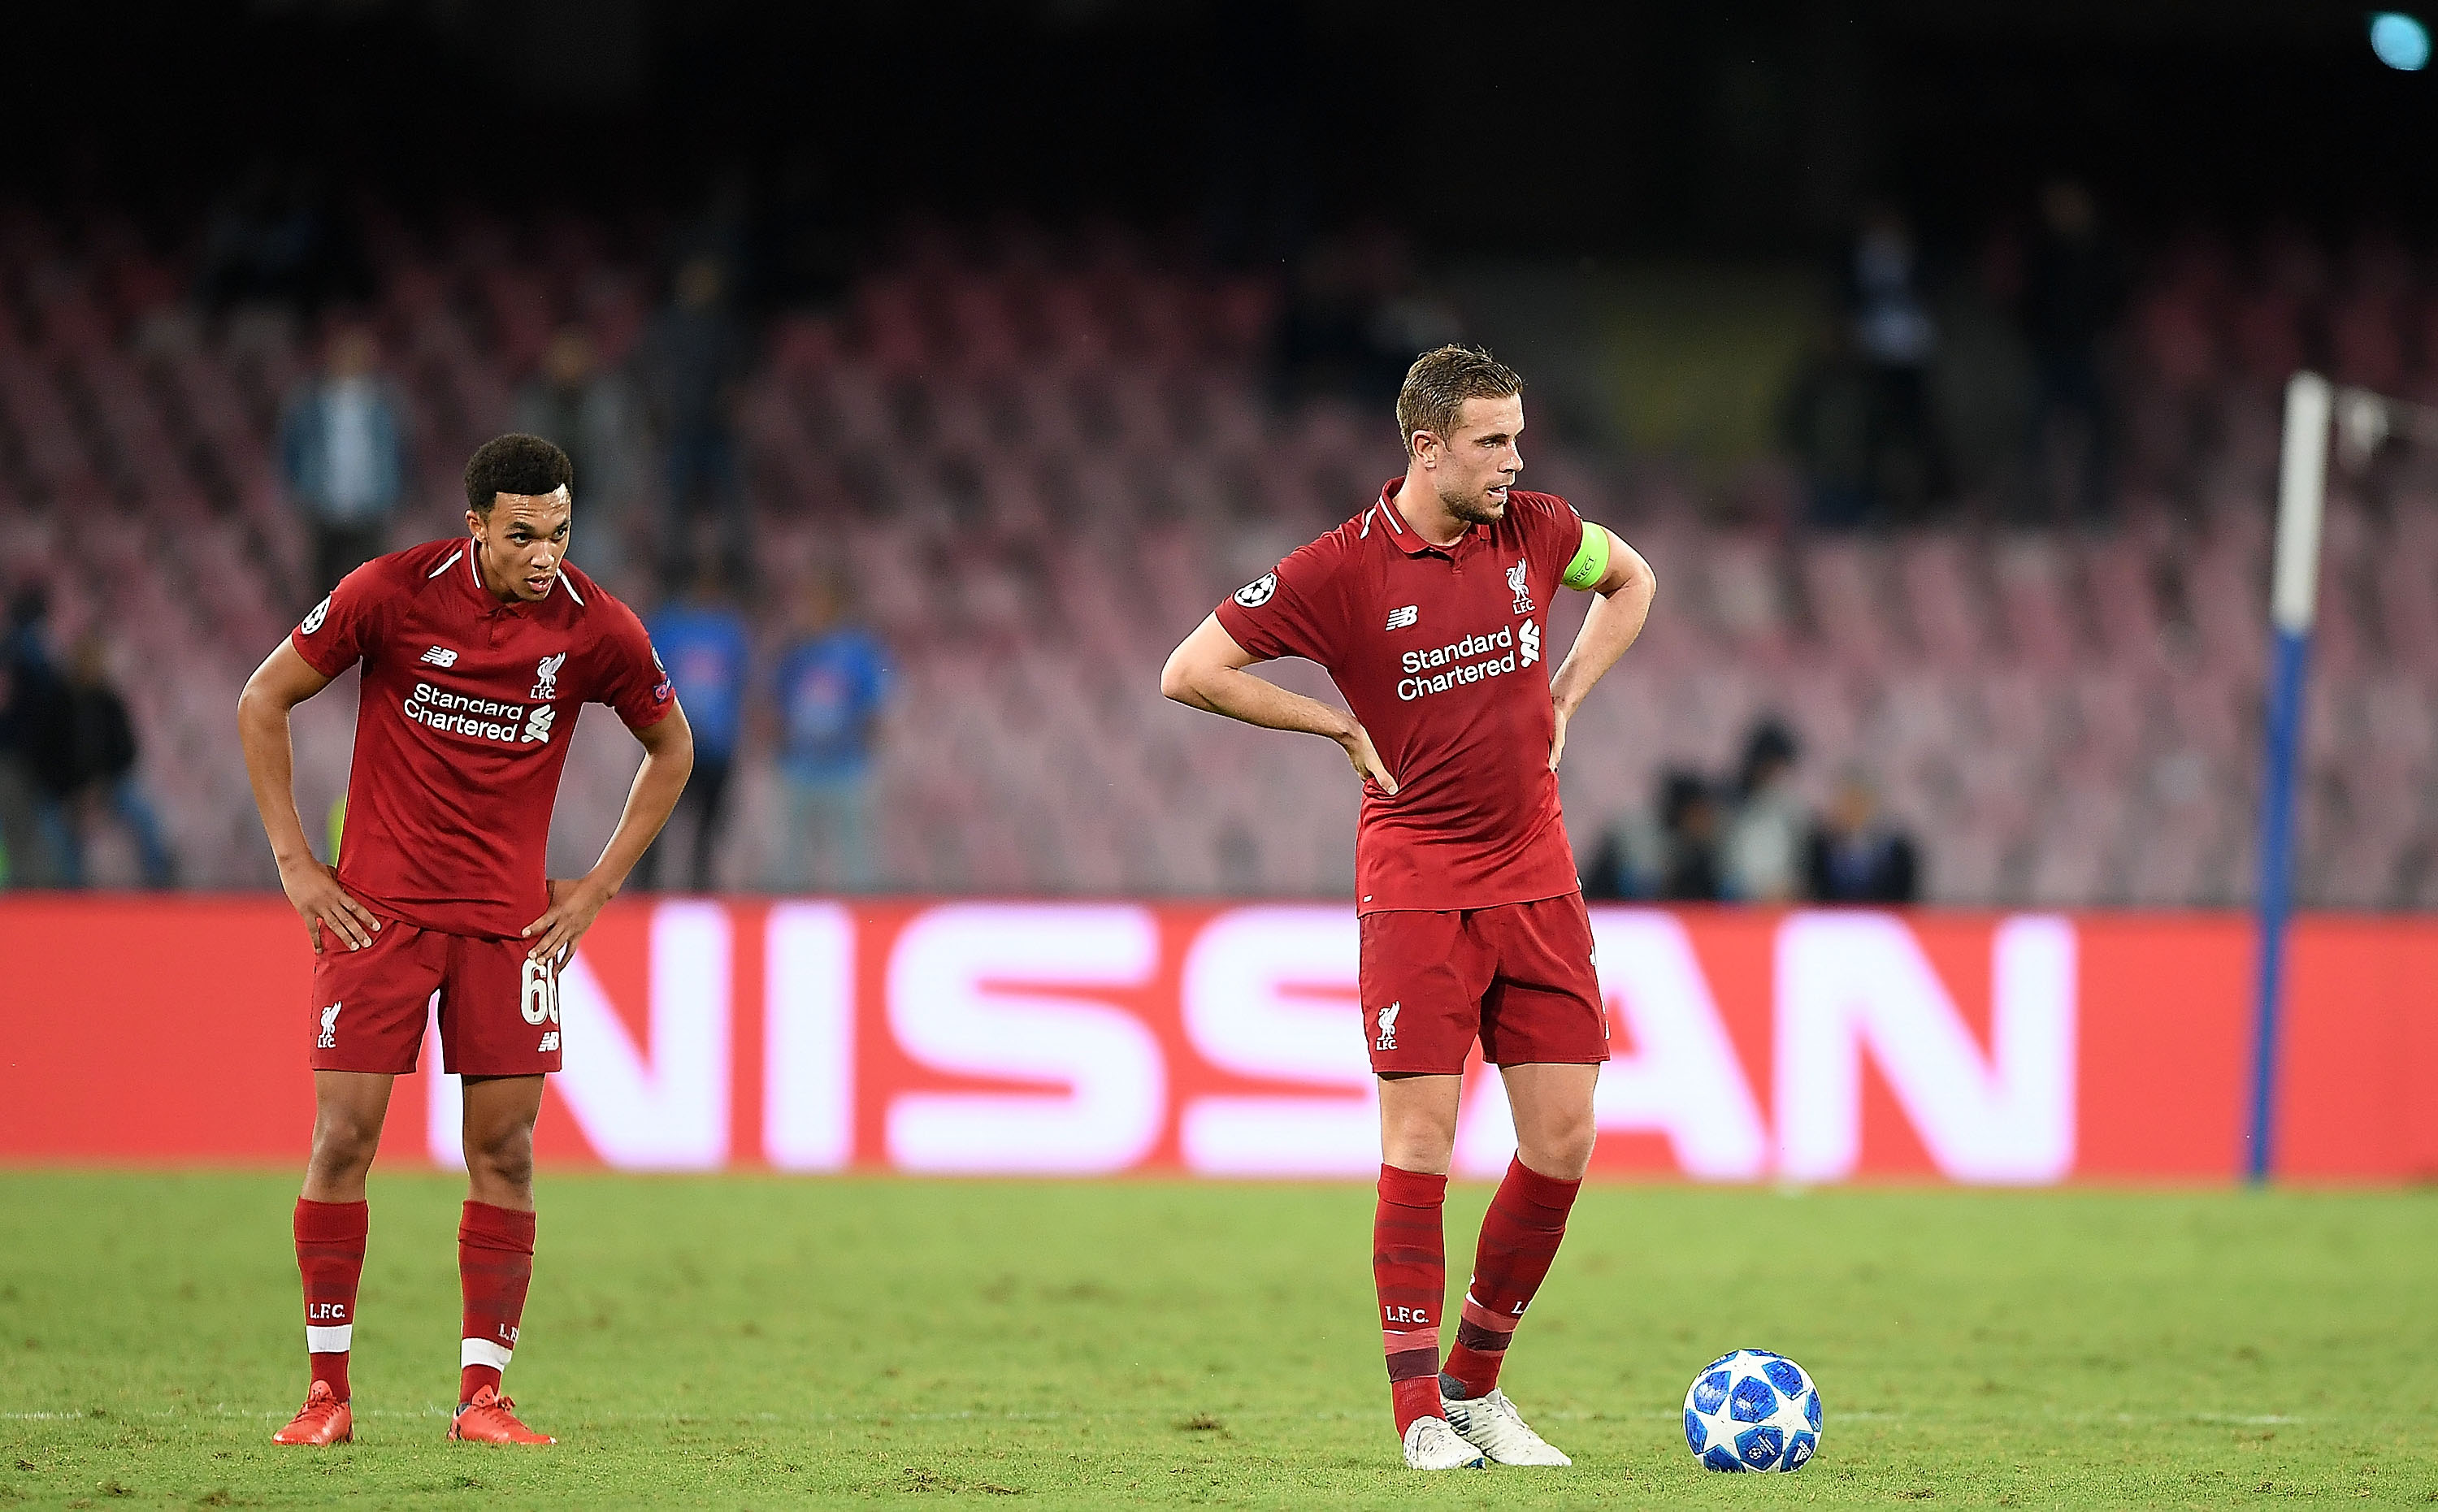 NAPLES, ITALY - OCTOBER 03: Jordan Henderson and Trent Alexander-Arnold of Liverpool stand disappointed during the Group C match of the UEFA Champions League between SSC Napoli and Liverpool at Stadio San Paolo on October 3, 2018 in Naples, Italy.  (Photo by Francesco Pecoraro/Getty Images)